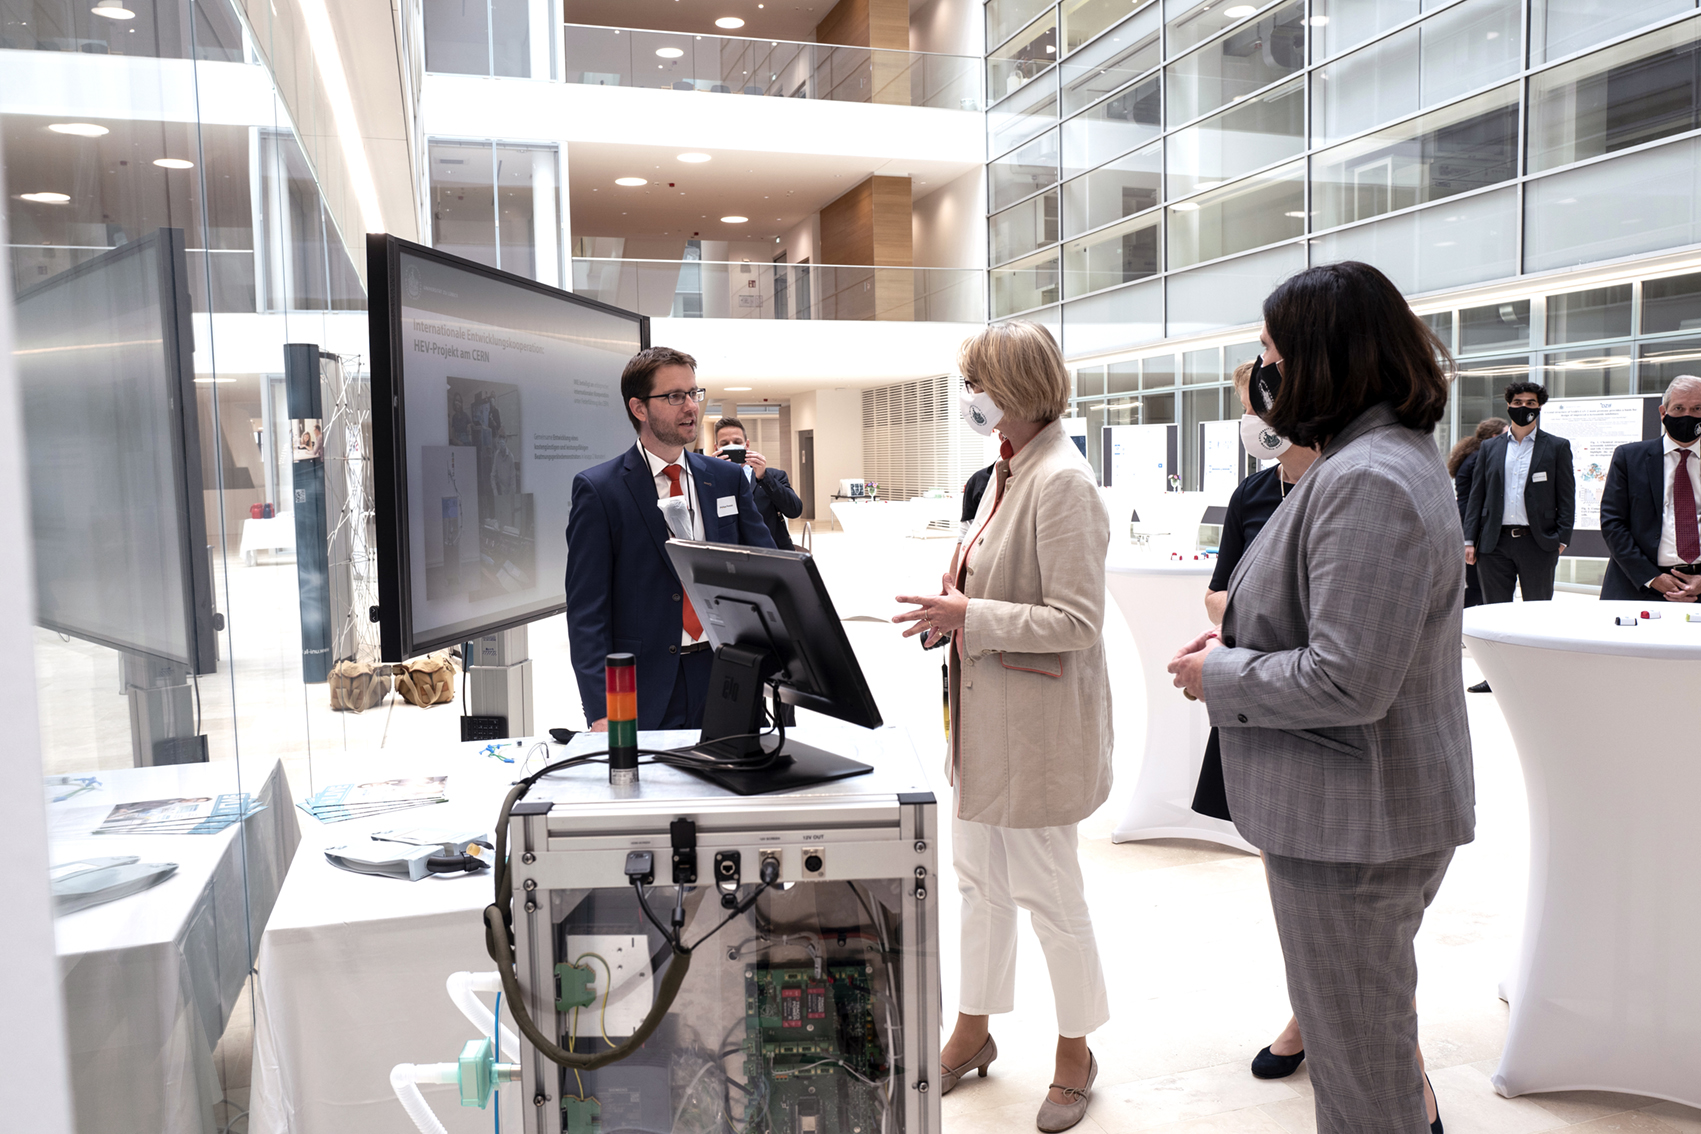 Philipp Rostalski in the foyer of the new research building operating and explaining the HEV unit to the minister and other honorable members of the state and federal parliament.